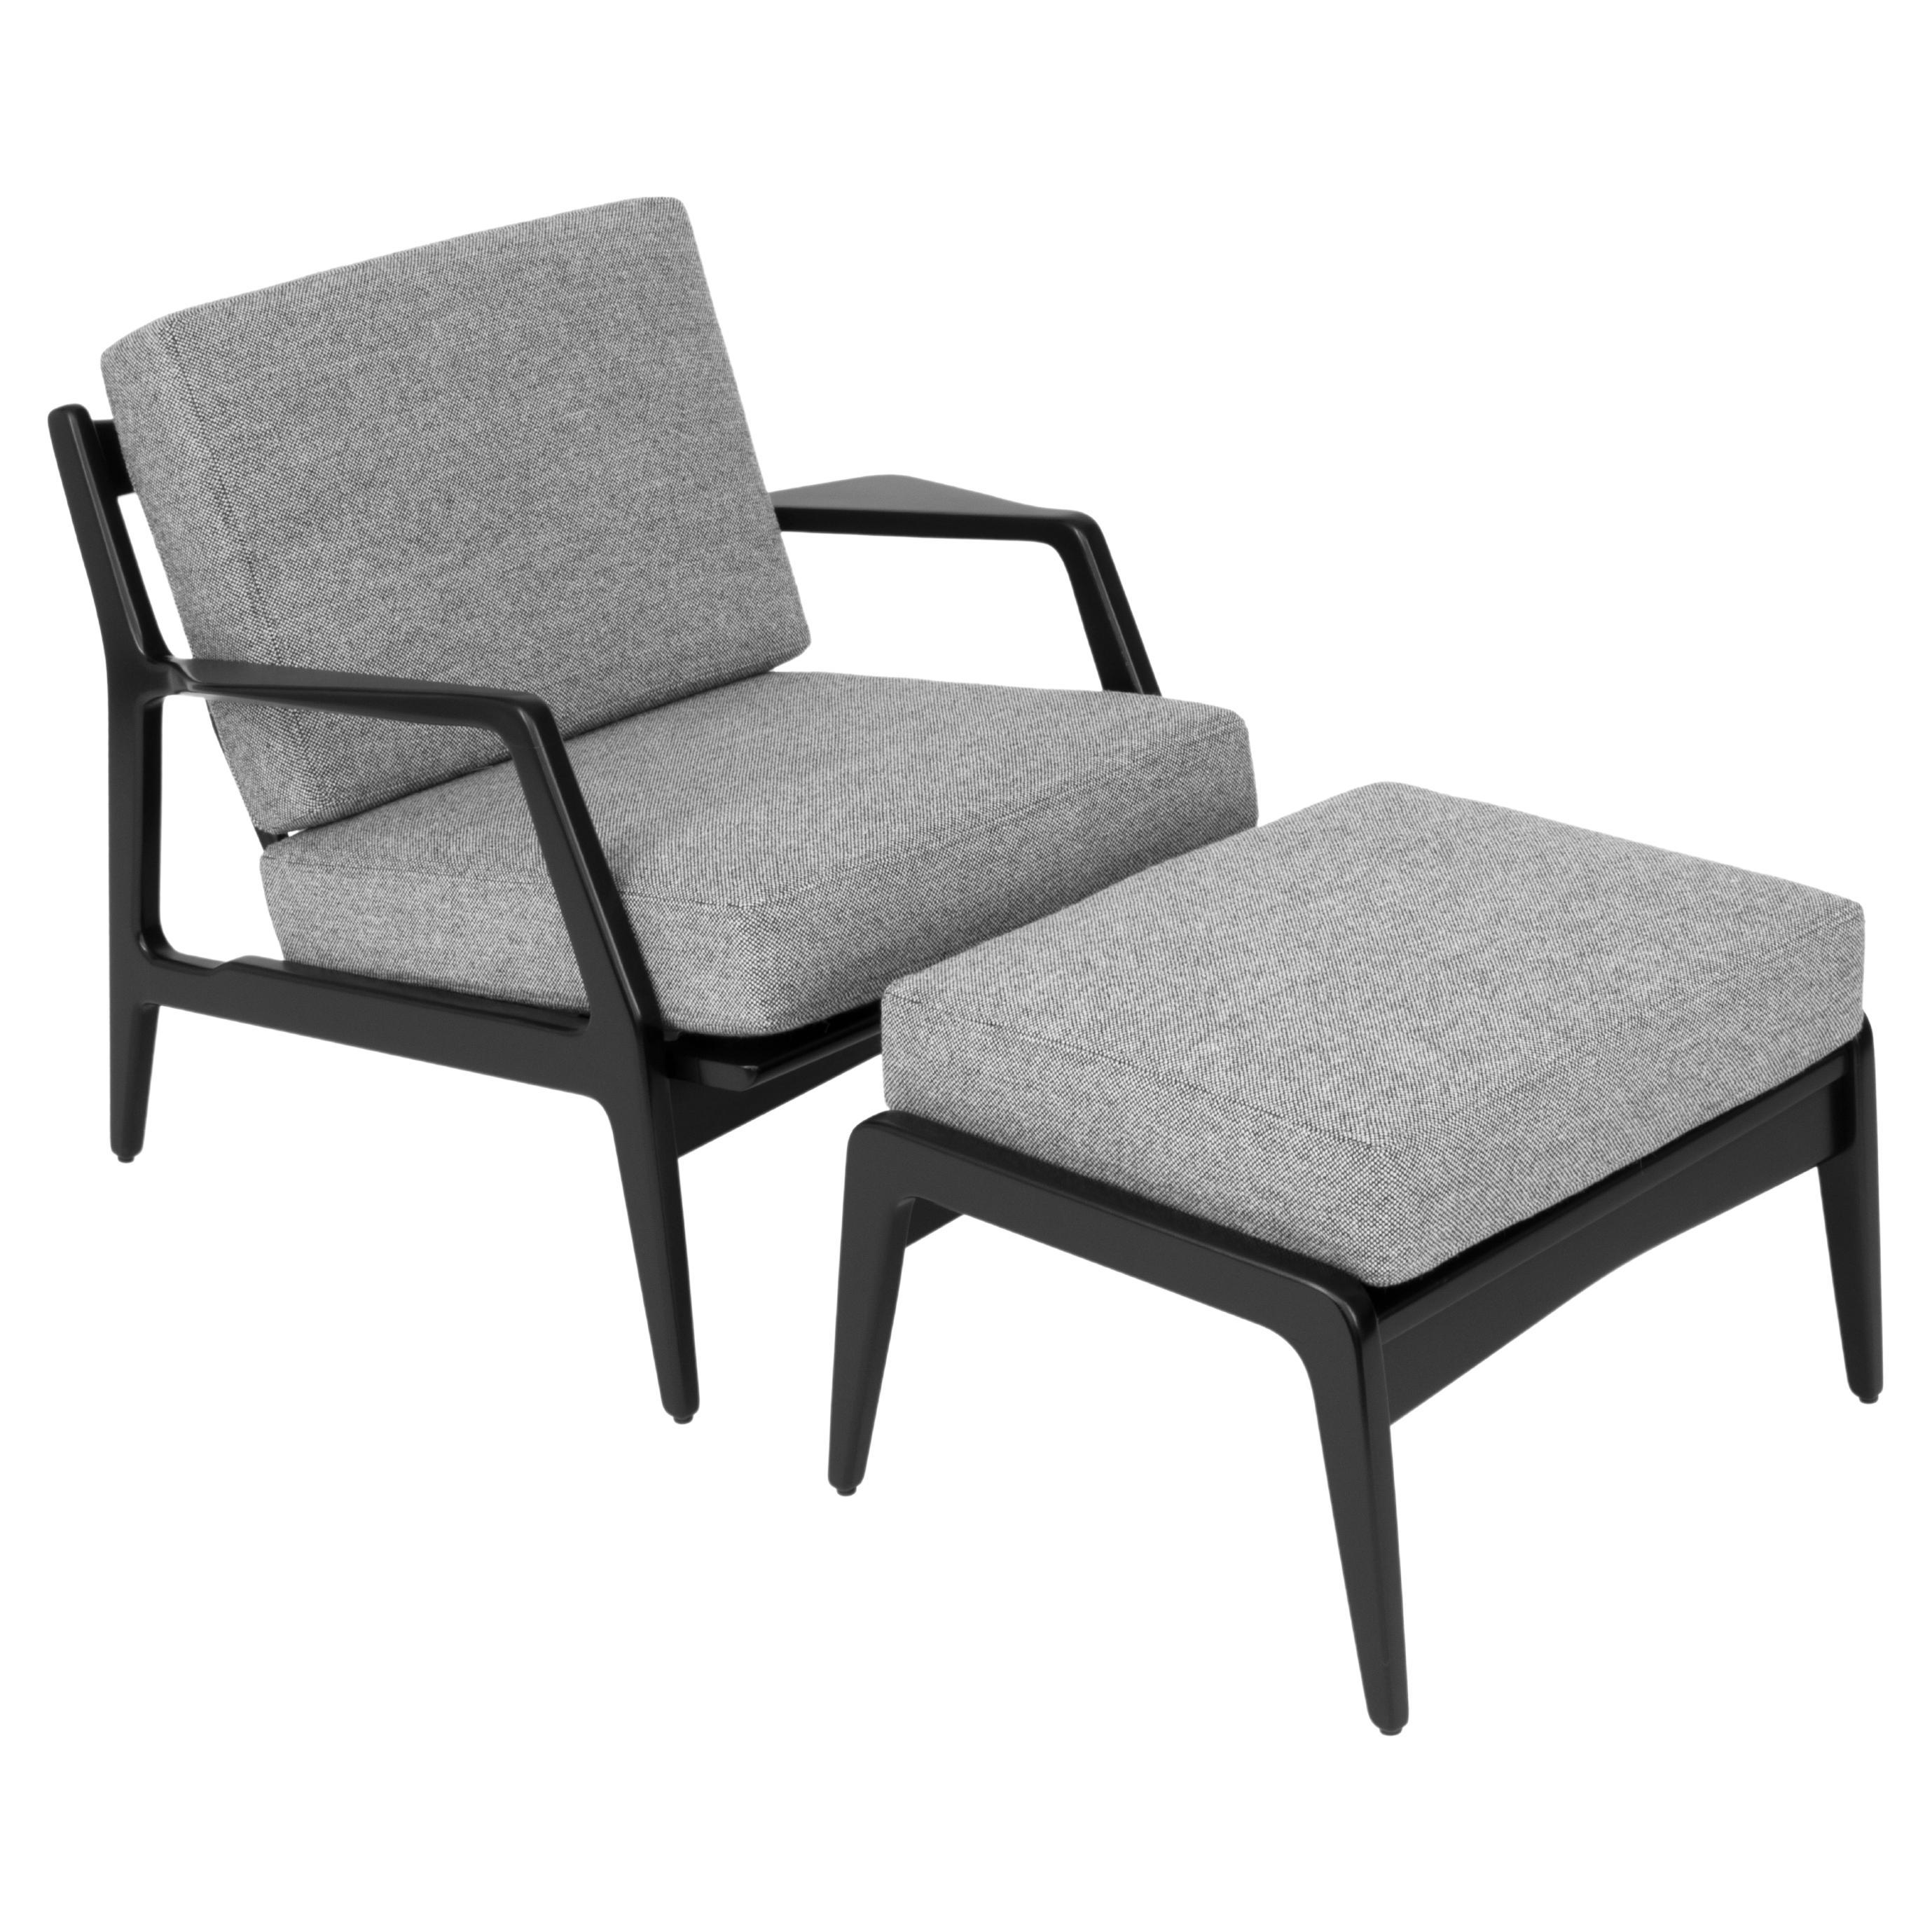 Vintage Danish Modern Lounge Chair and Ottoman by Lawrence Peabody For Sale